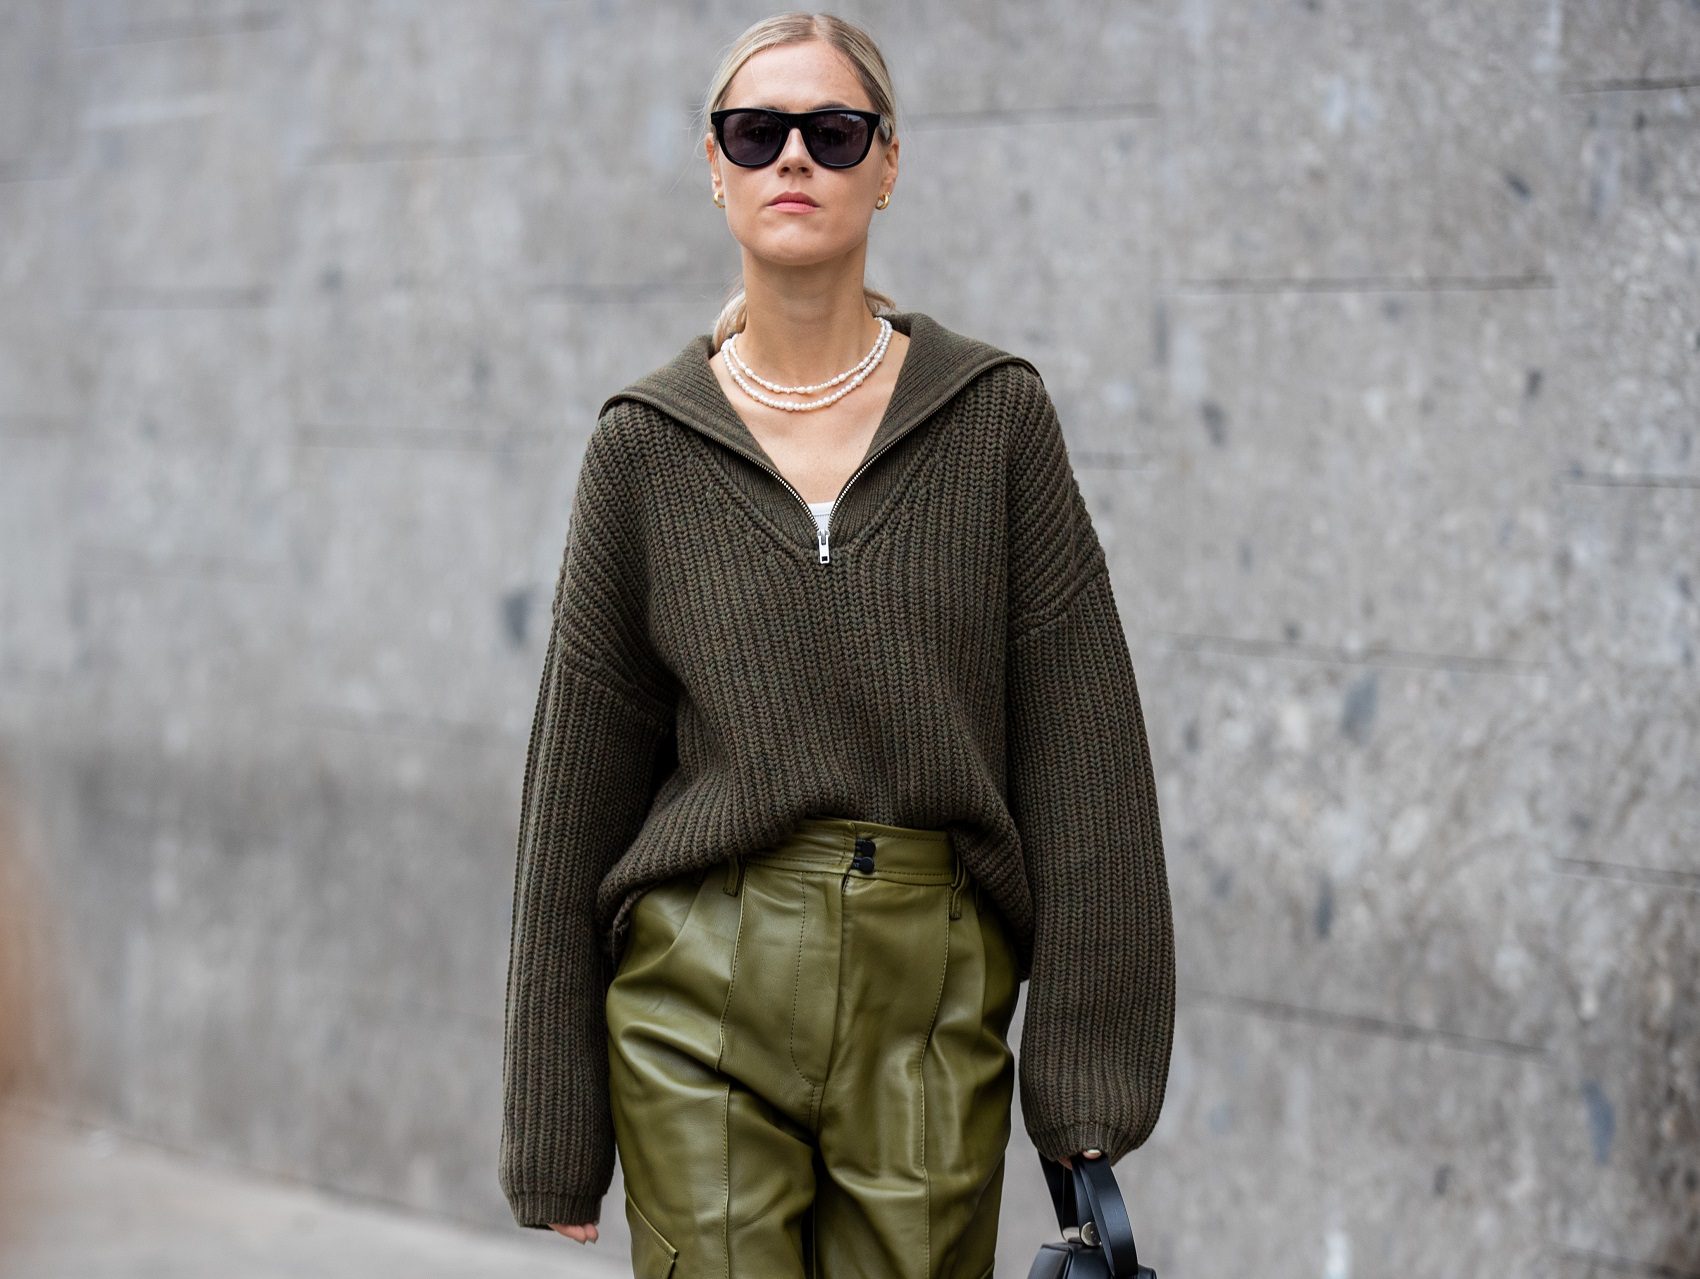 The sweater that was a hit in the ’80s is cool again